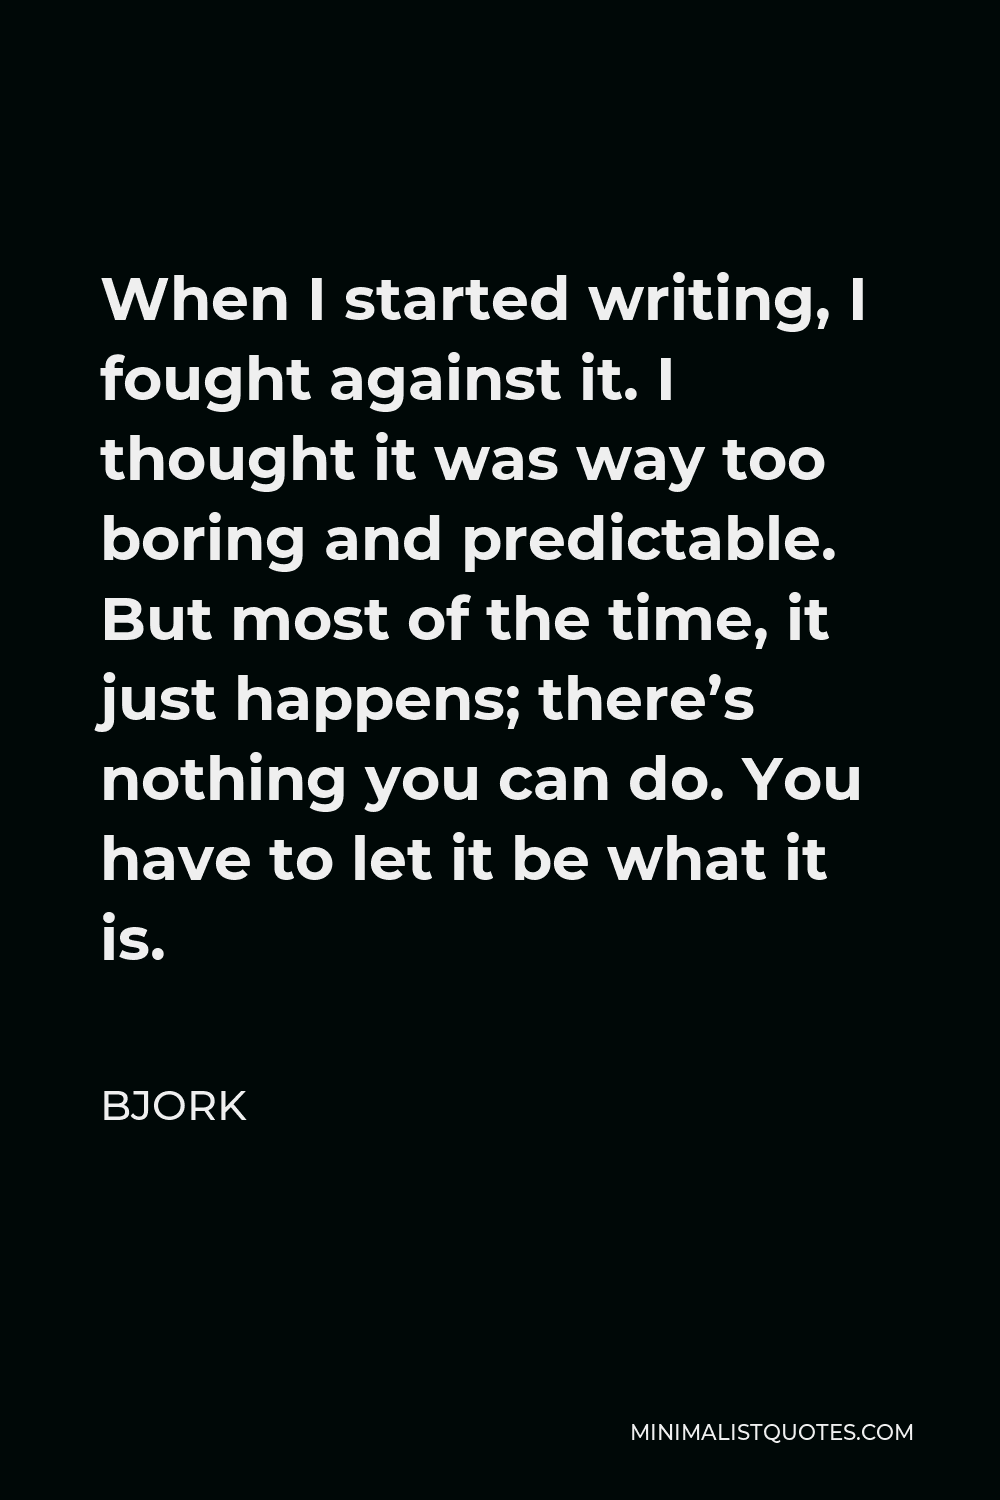 Bjork Quote - When I started writing, I fought against it. I thought it was way too boring and predictable. But most of the time, it just happens; there’s nothing you can do. You have to let it be what it is.